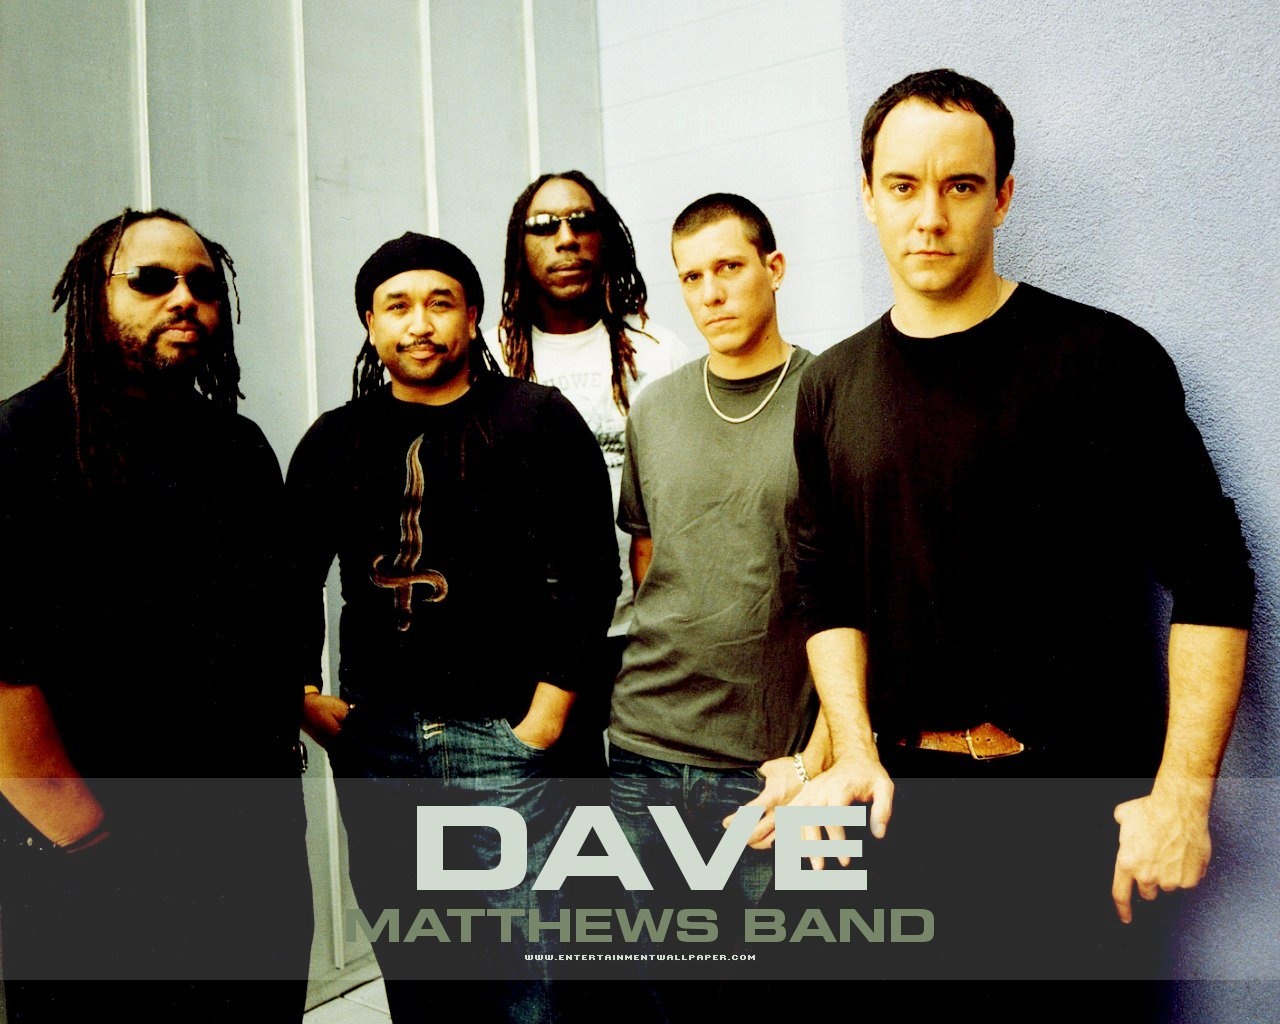 Dave Matthews The Band Formed In Charlottesville